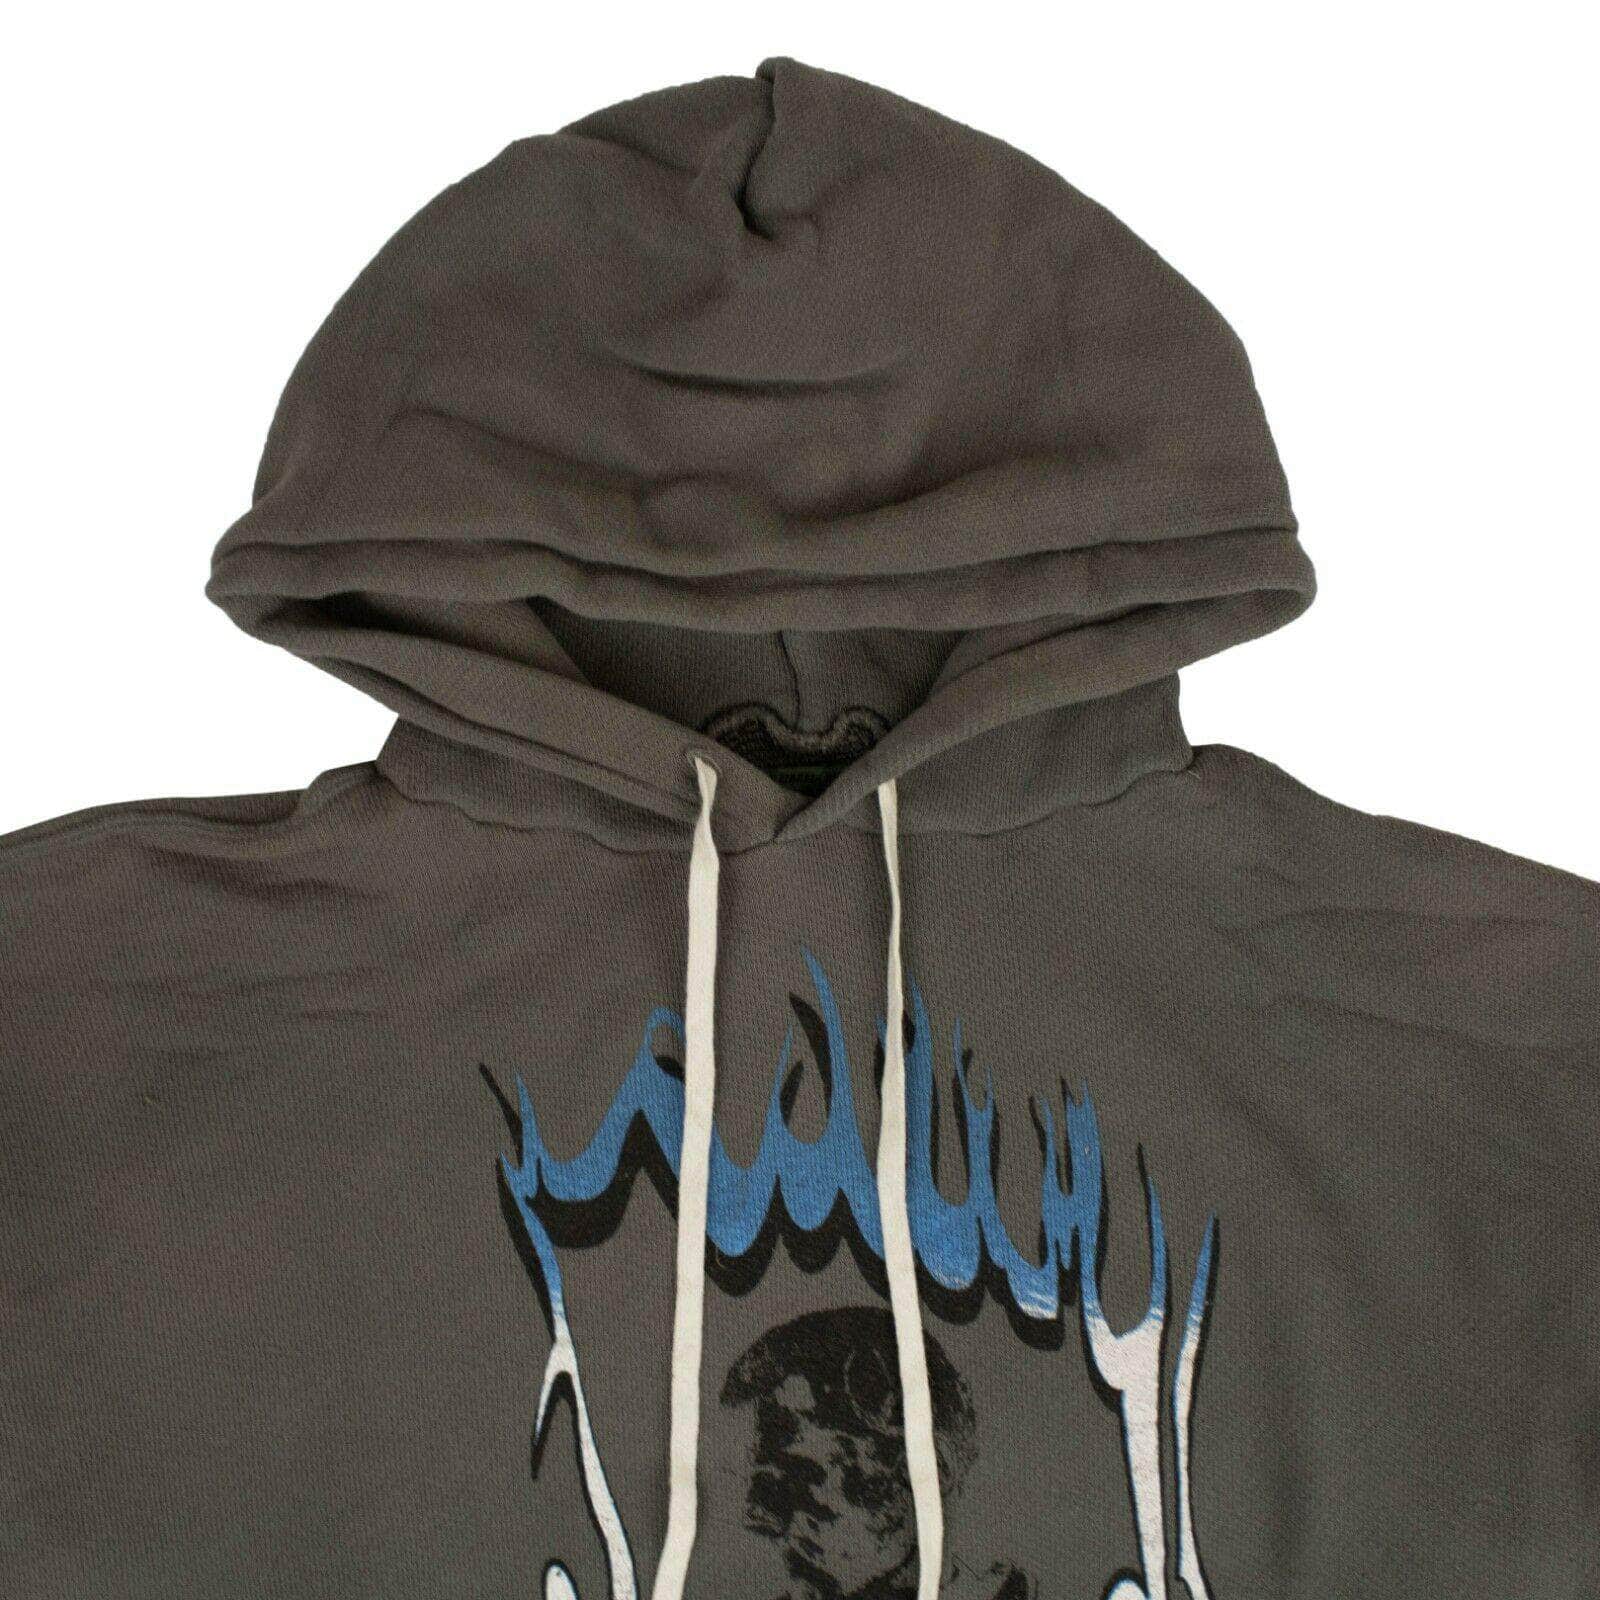 Shop 375™ 250-500, channelenable-all, couponcollection, gender-mens, main-clothing, size-l, size-m, size-s M / GREY_PEACEHEAD_HOODIE NWT SIBERIA HILLS Gray 'Peacehead' Hoodie 75LE-1823/M 75LE-1823/M